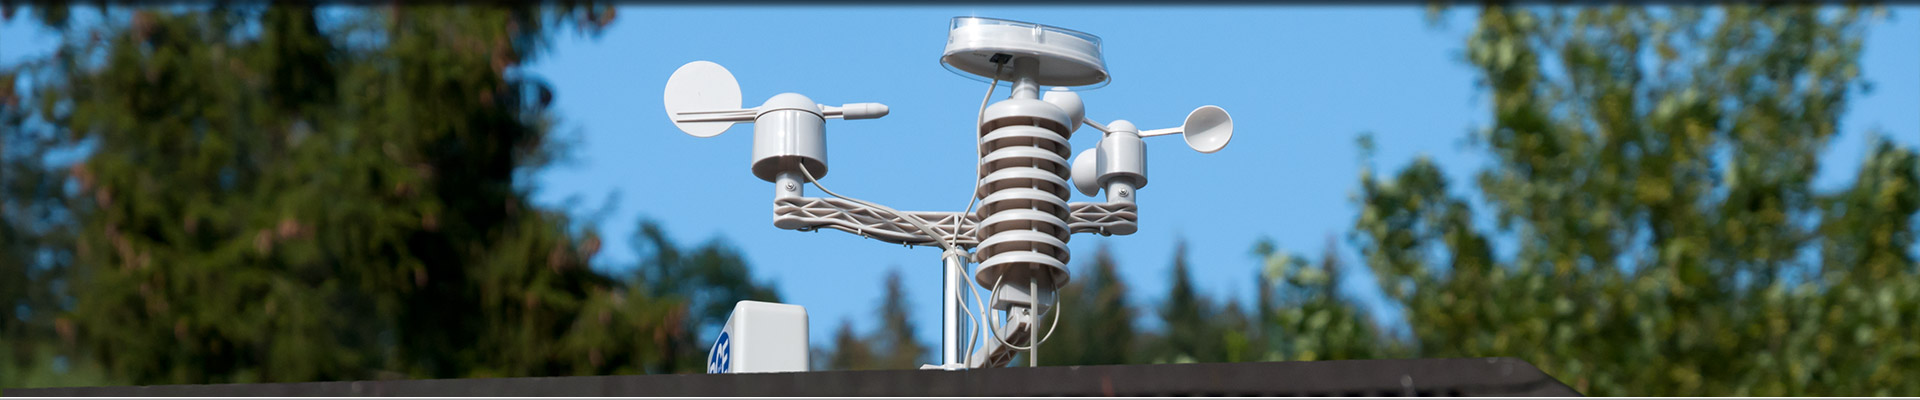 Outdoor Weather Station Domatic